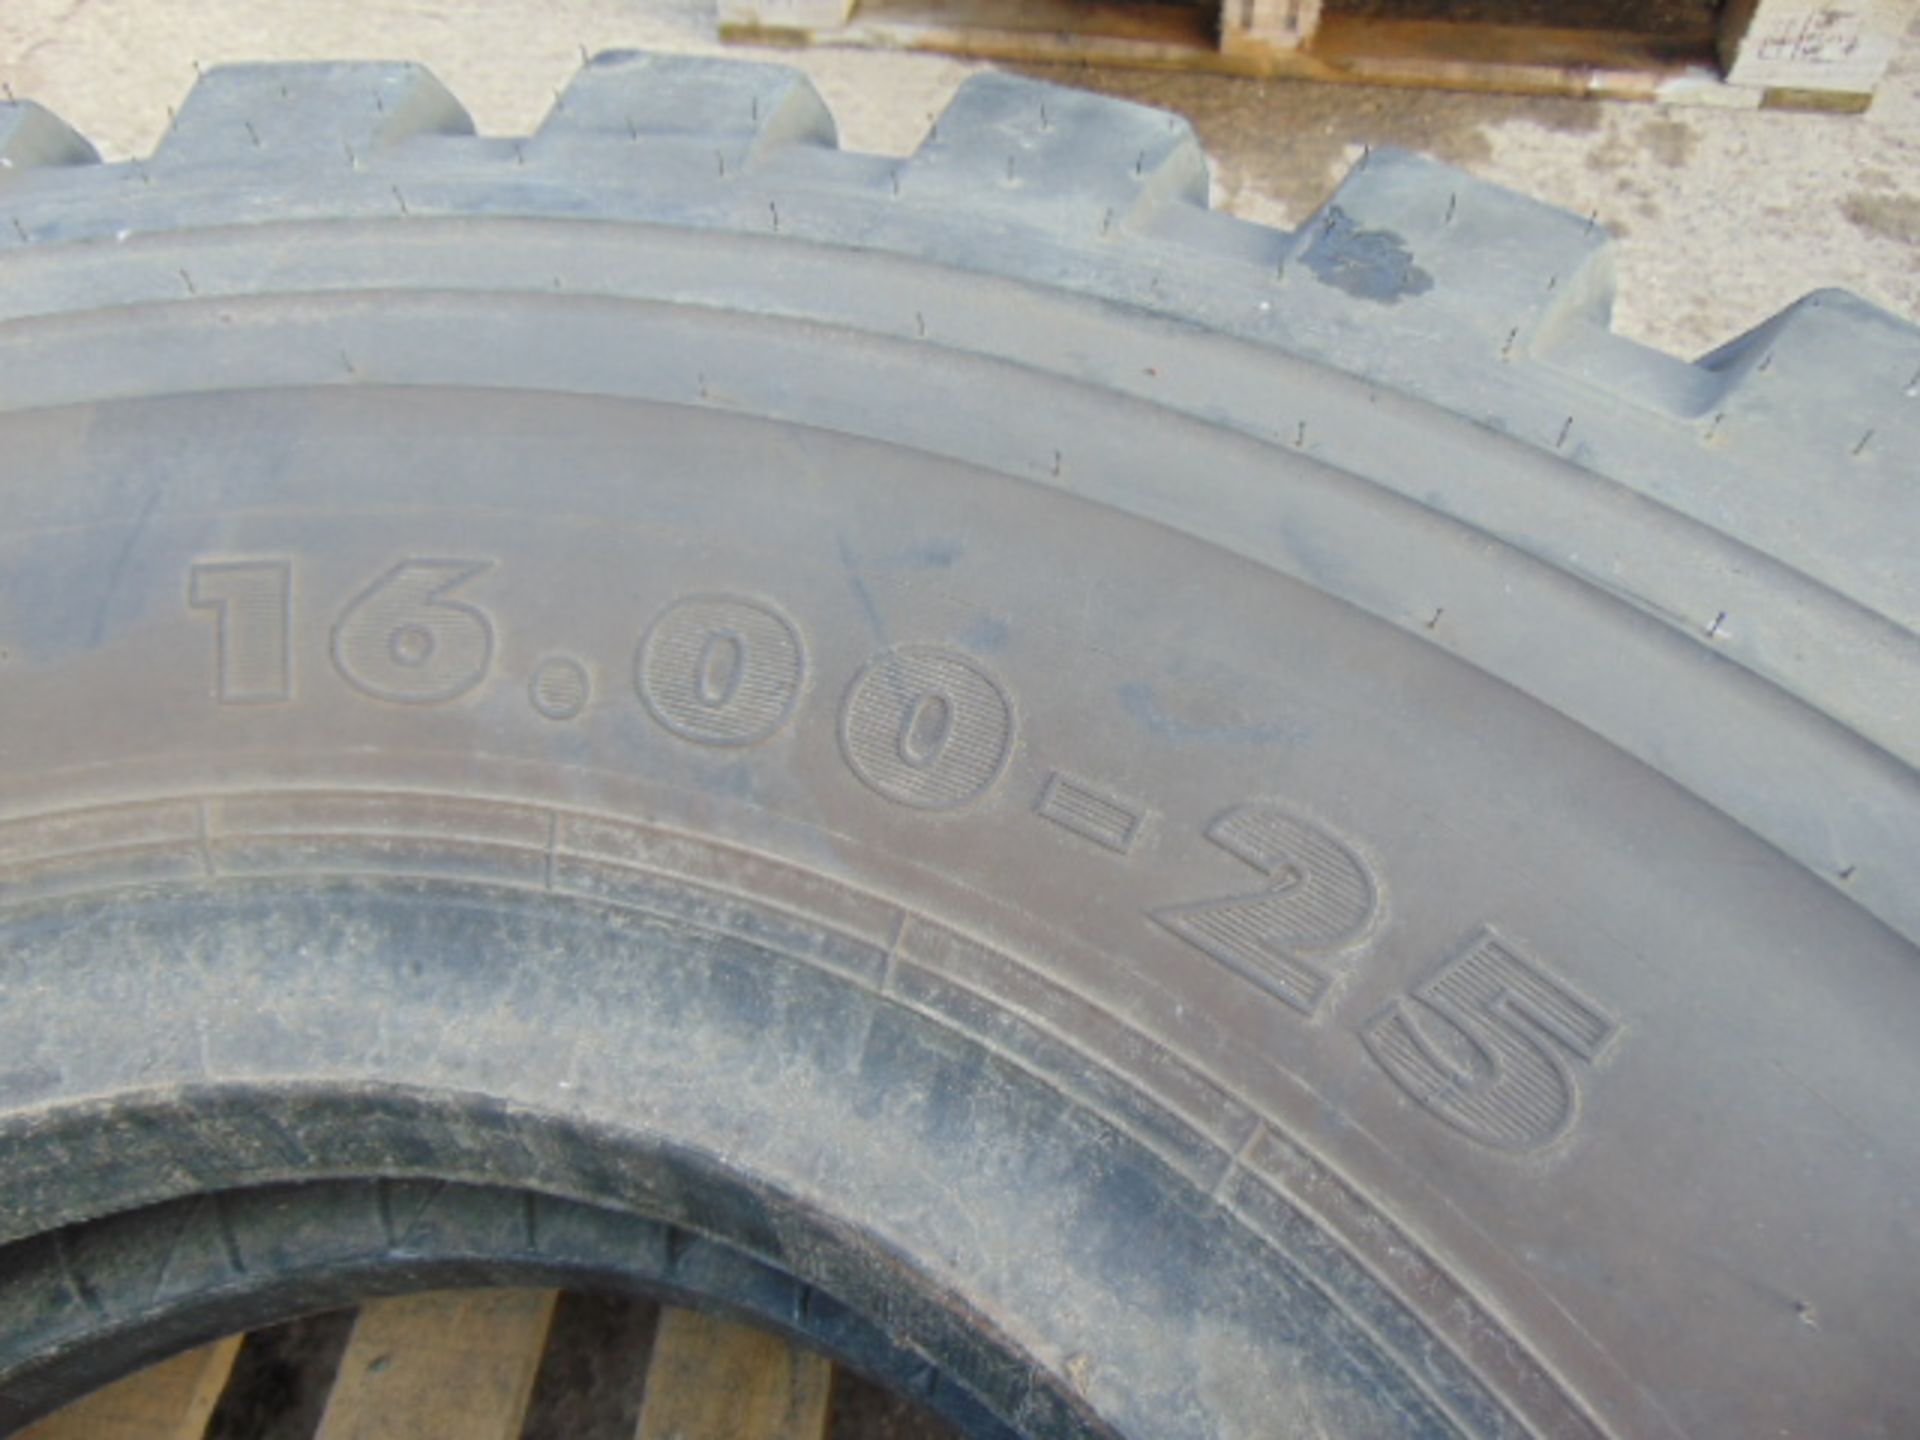 1 x Nokian HTS 16.00-25 Tyre - Image 5 of 5